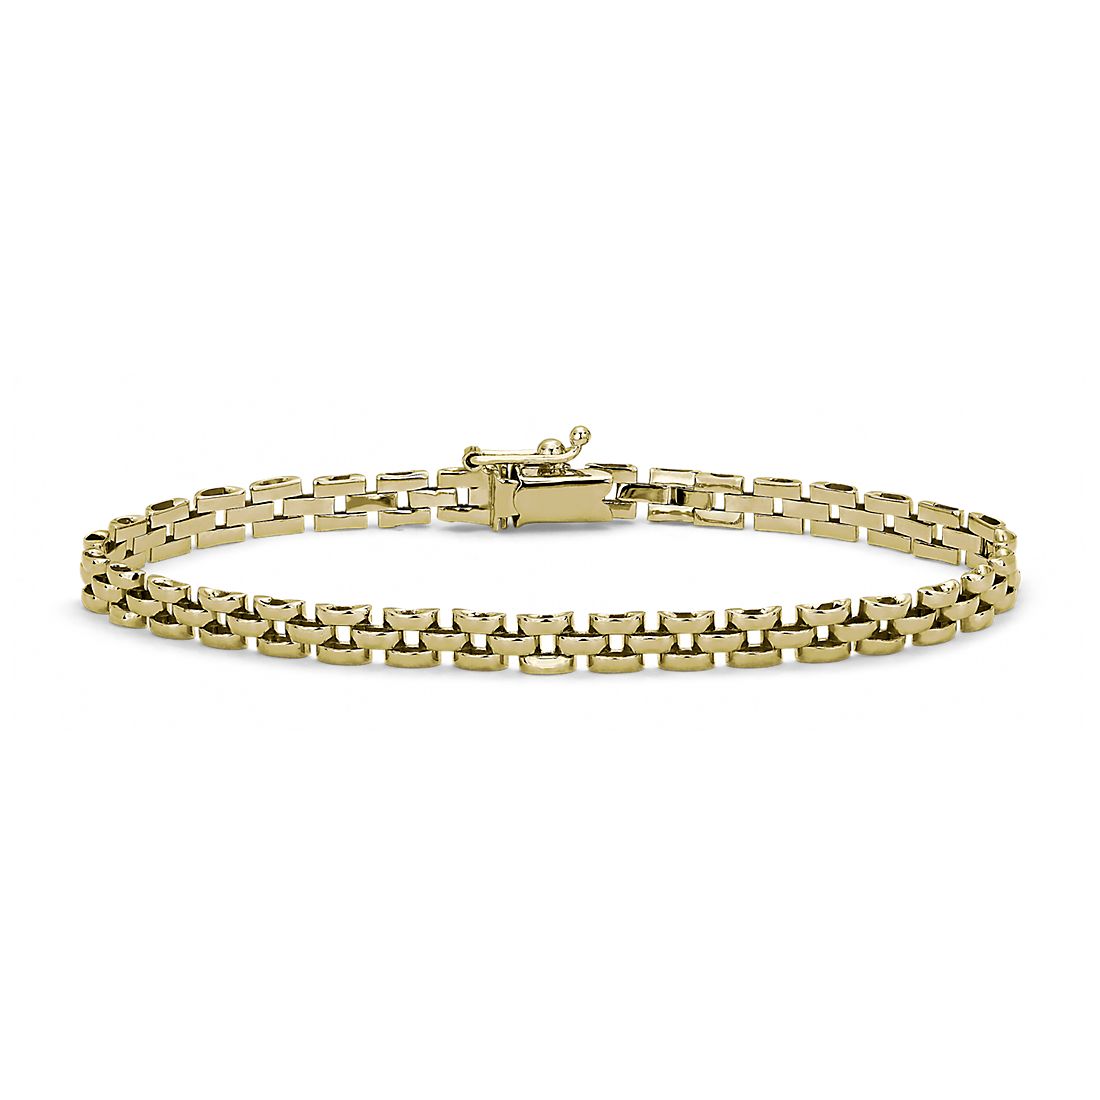 7.5" Petite Panther Bracelet in 14k Yellow Gold (4.8 mm)